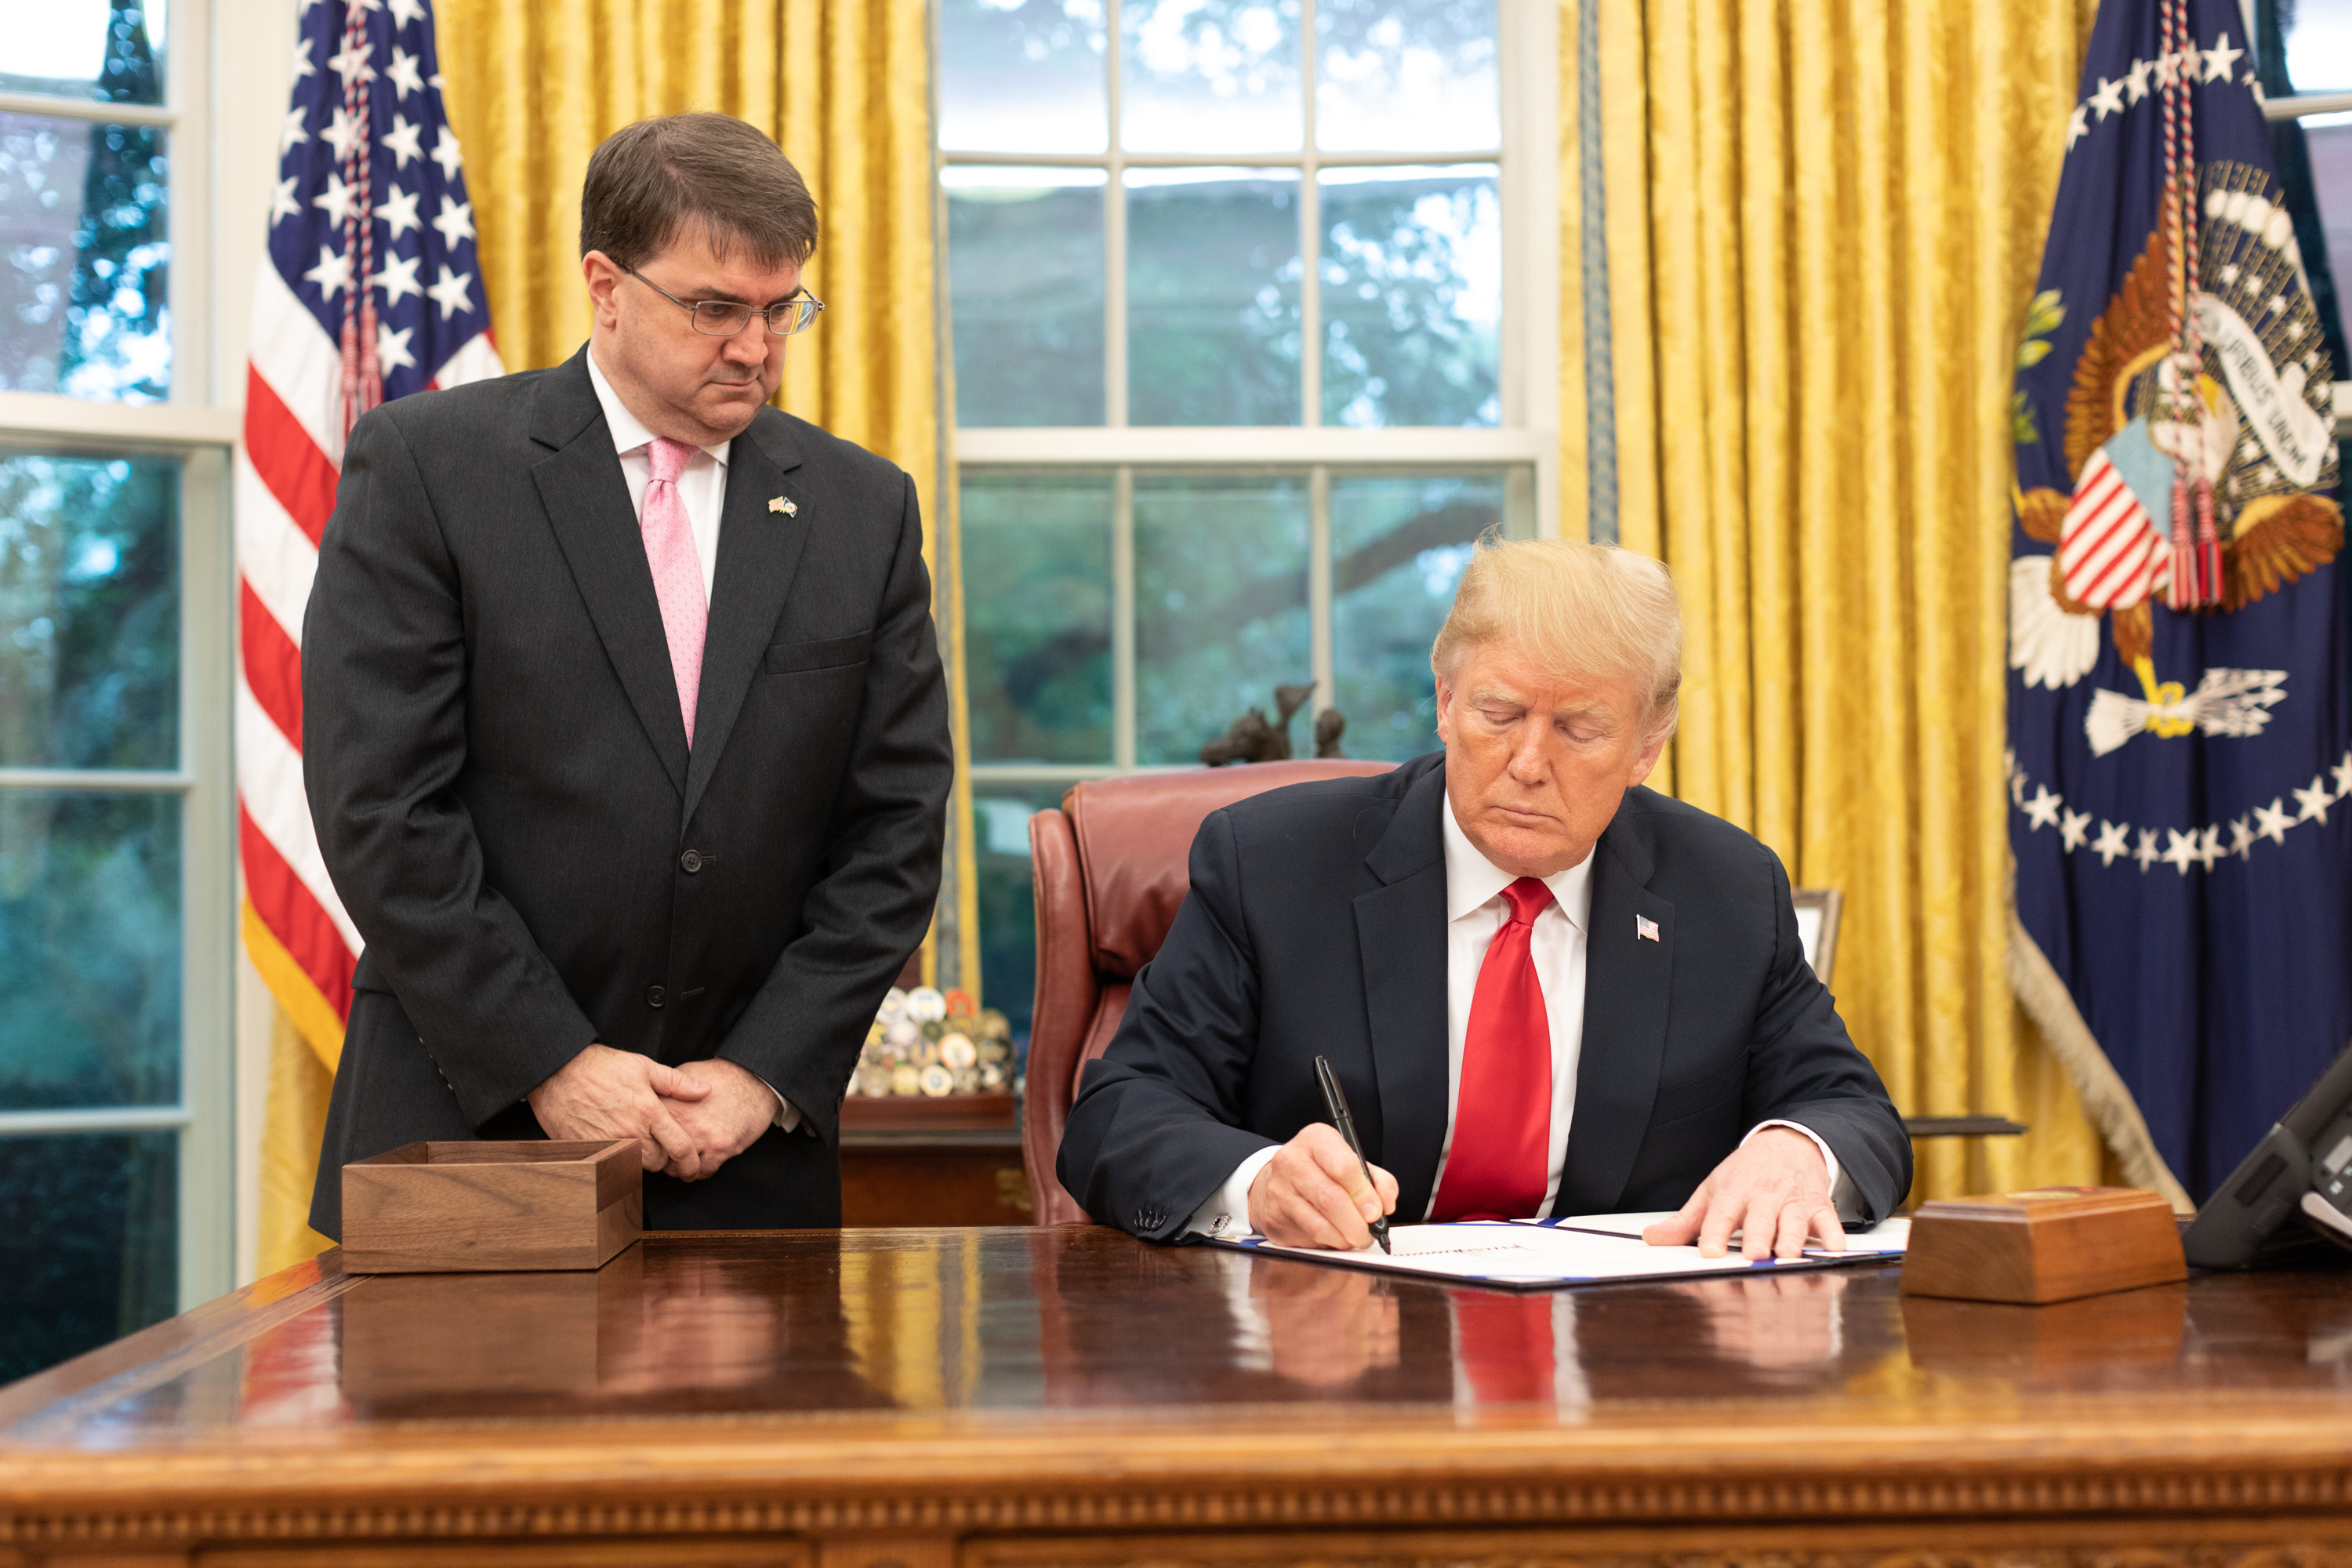 President Donald J. Trump, joined by U.S. Secretary of Veterans Affairs Robert Wilkie, signs H.R. 2147, The Veterans Treatment Court Improvement Act of 2018 Monday, Sept. 17, 2018, in the Oval Office of the White House. (Official White House Photo by Joyce N. Boghosian)